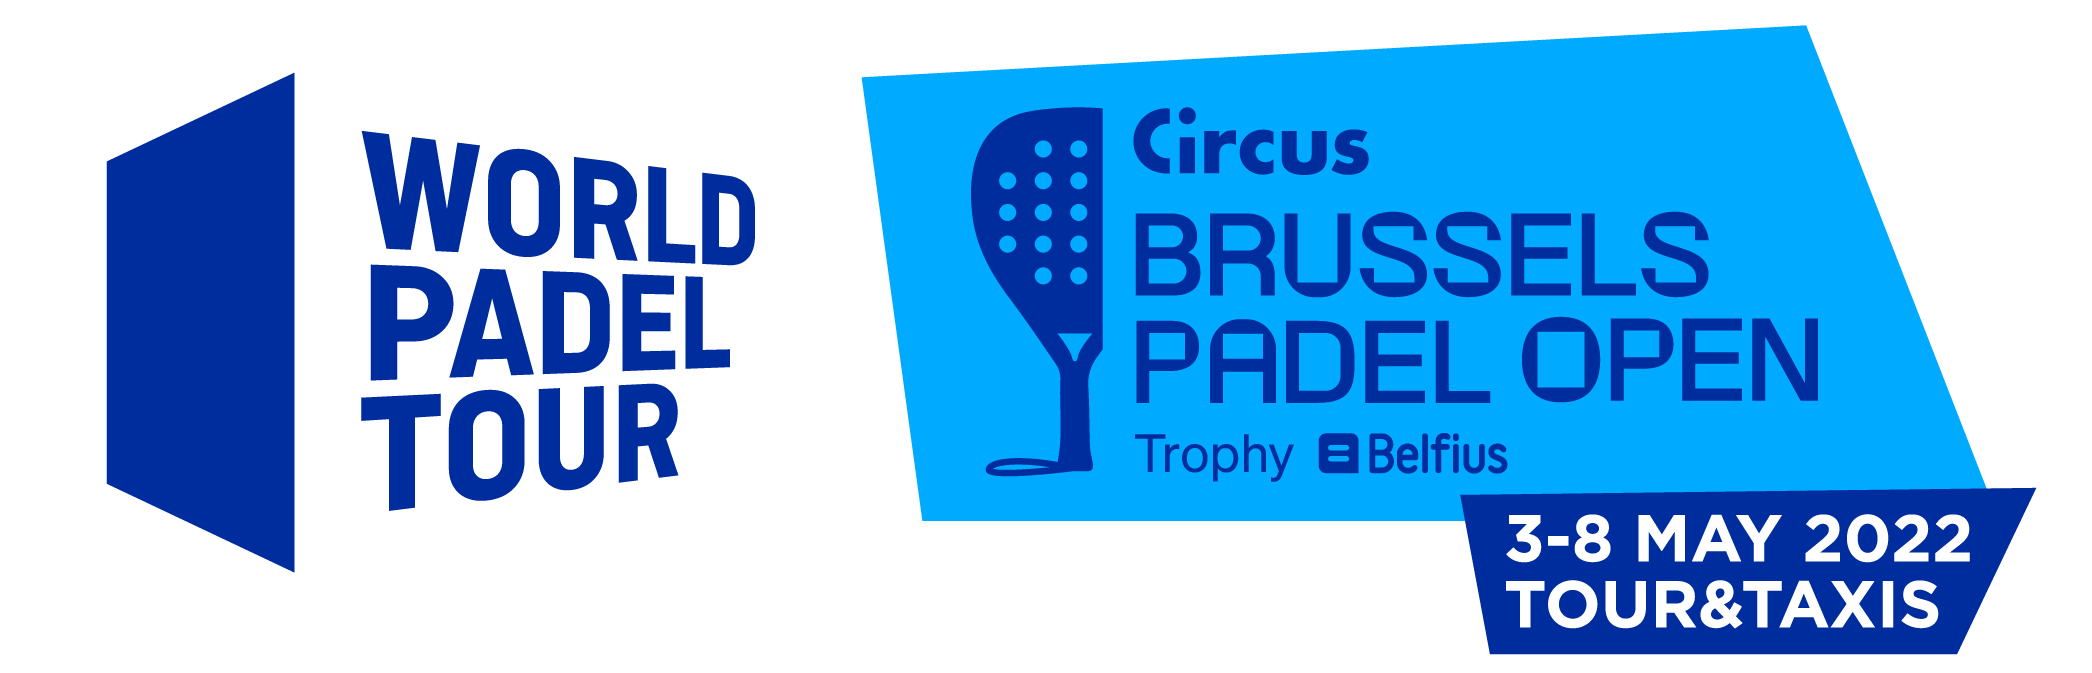 Circus Brussels Padel Open